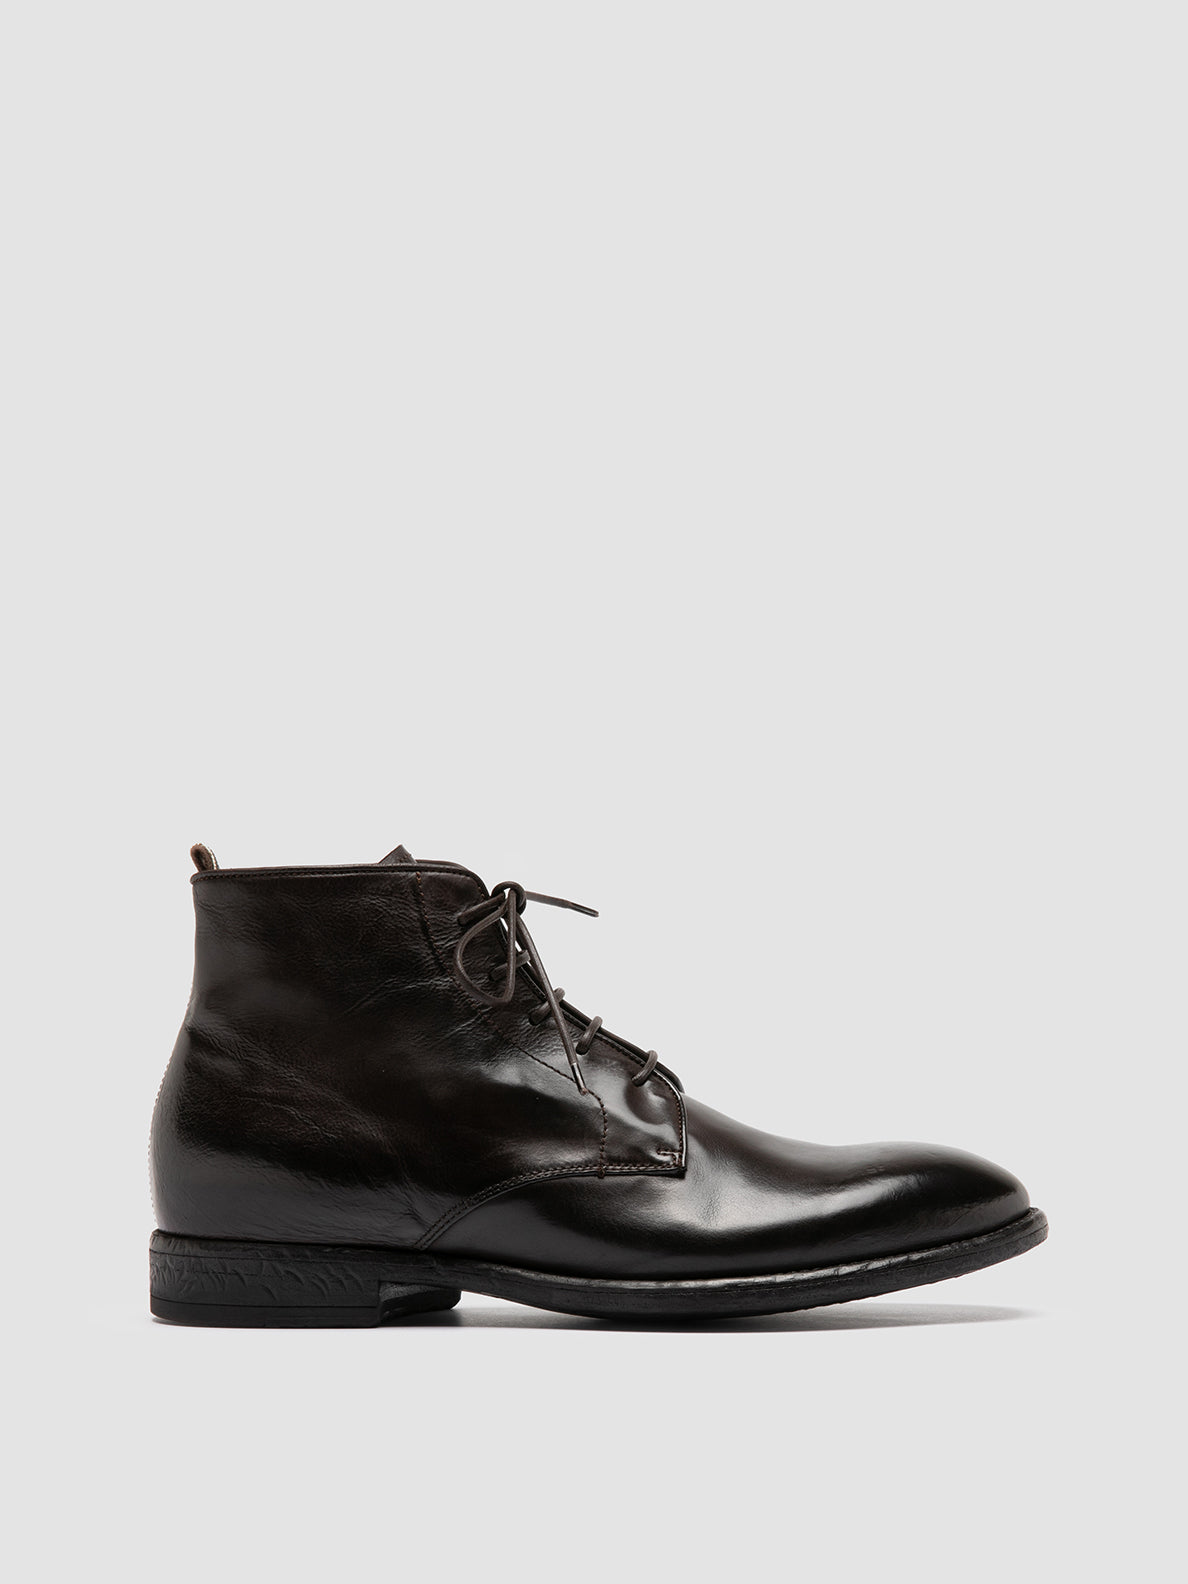 Men's Brown Leather Ankle Boots: EMORY 023 – Officine Creative EU